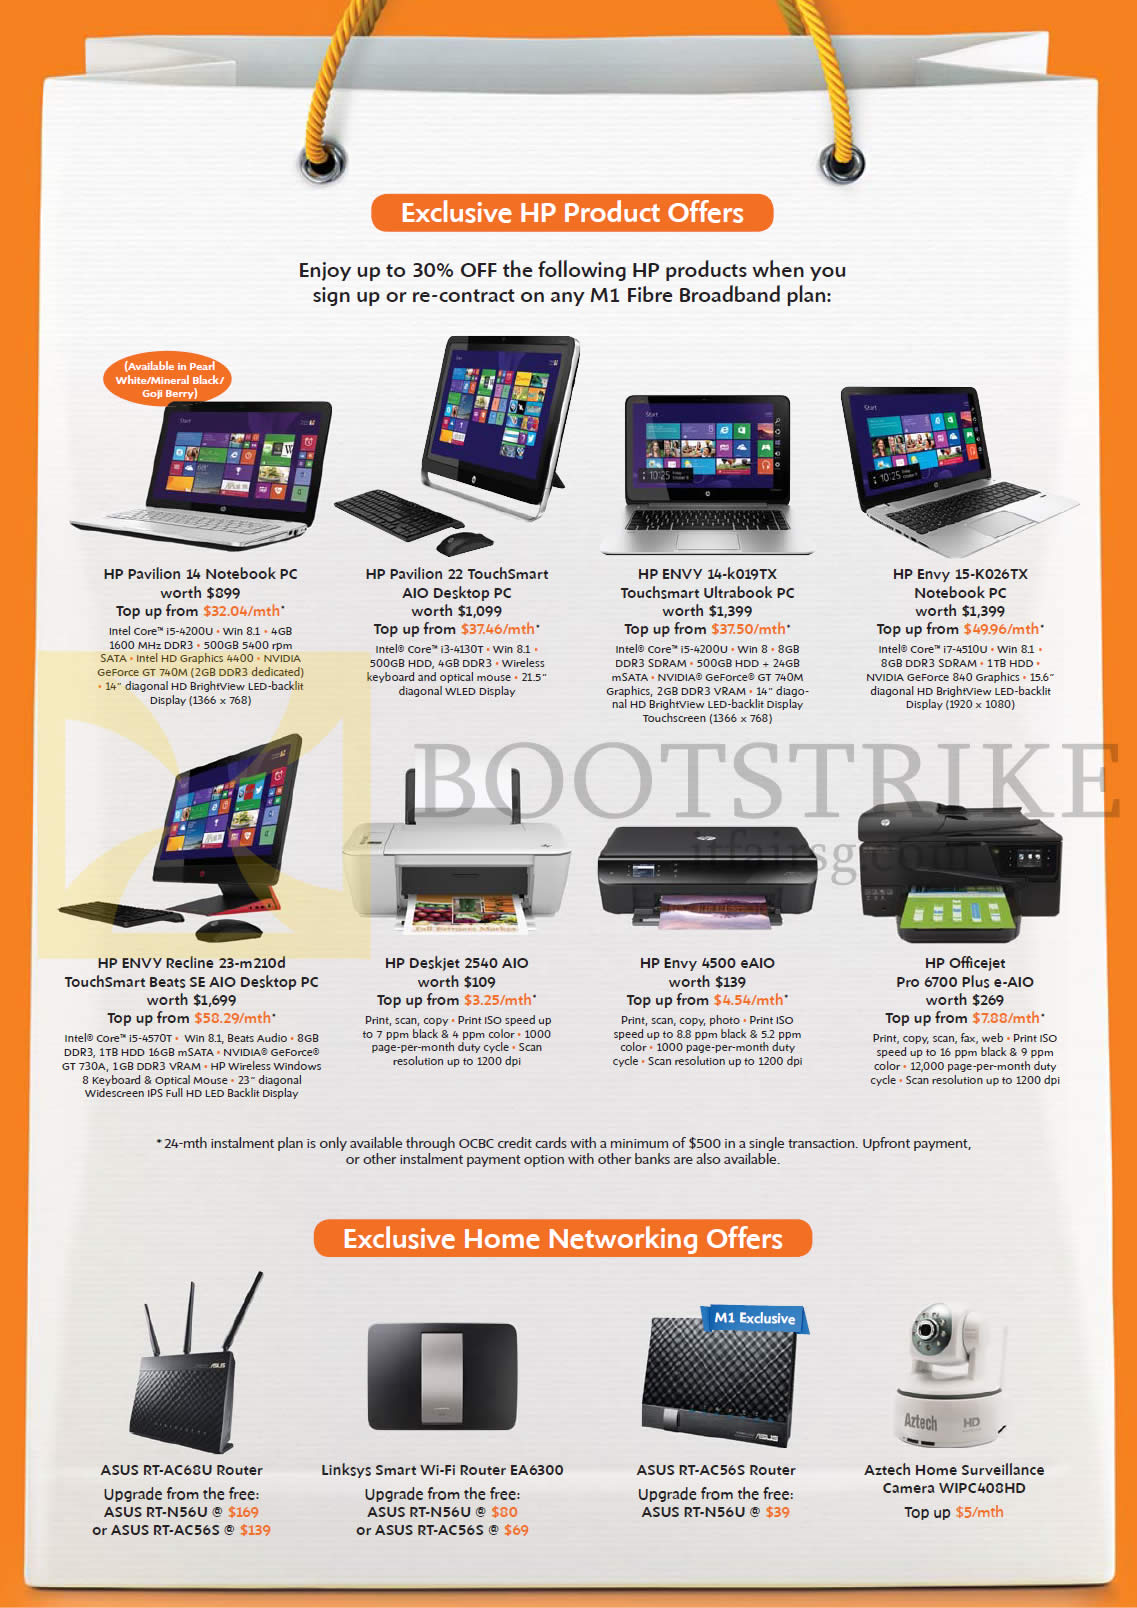 PC SHOW 2014 price list image brochure of M1 Broadband Fibre ASUS Linksys Aztech Networking, HP Notebook Offers, AIO Desktop PC, Printers, Router, IPCam